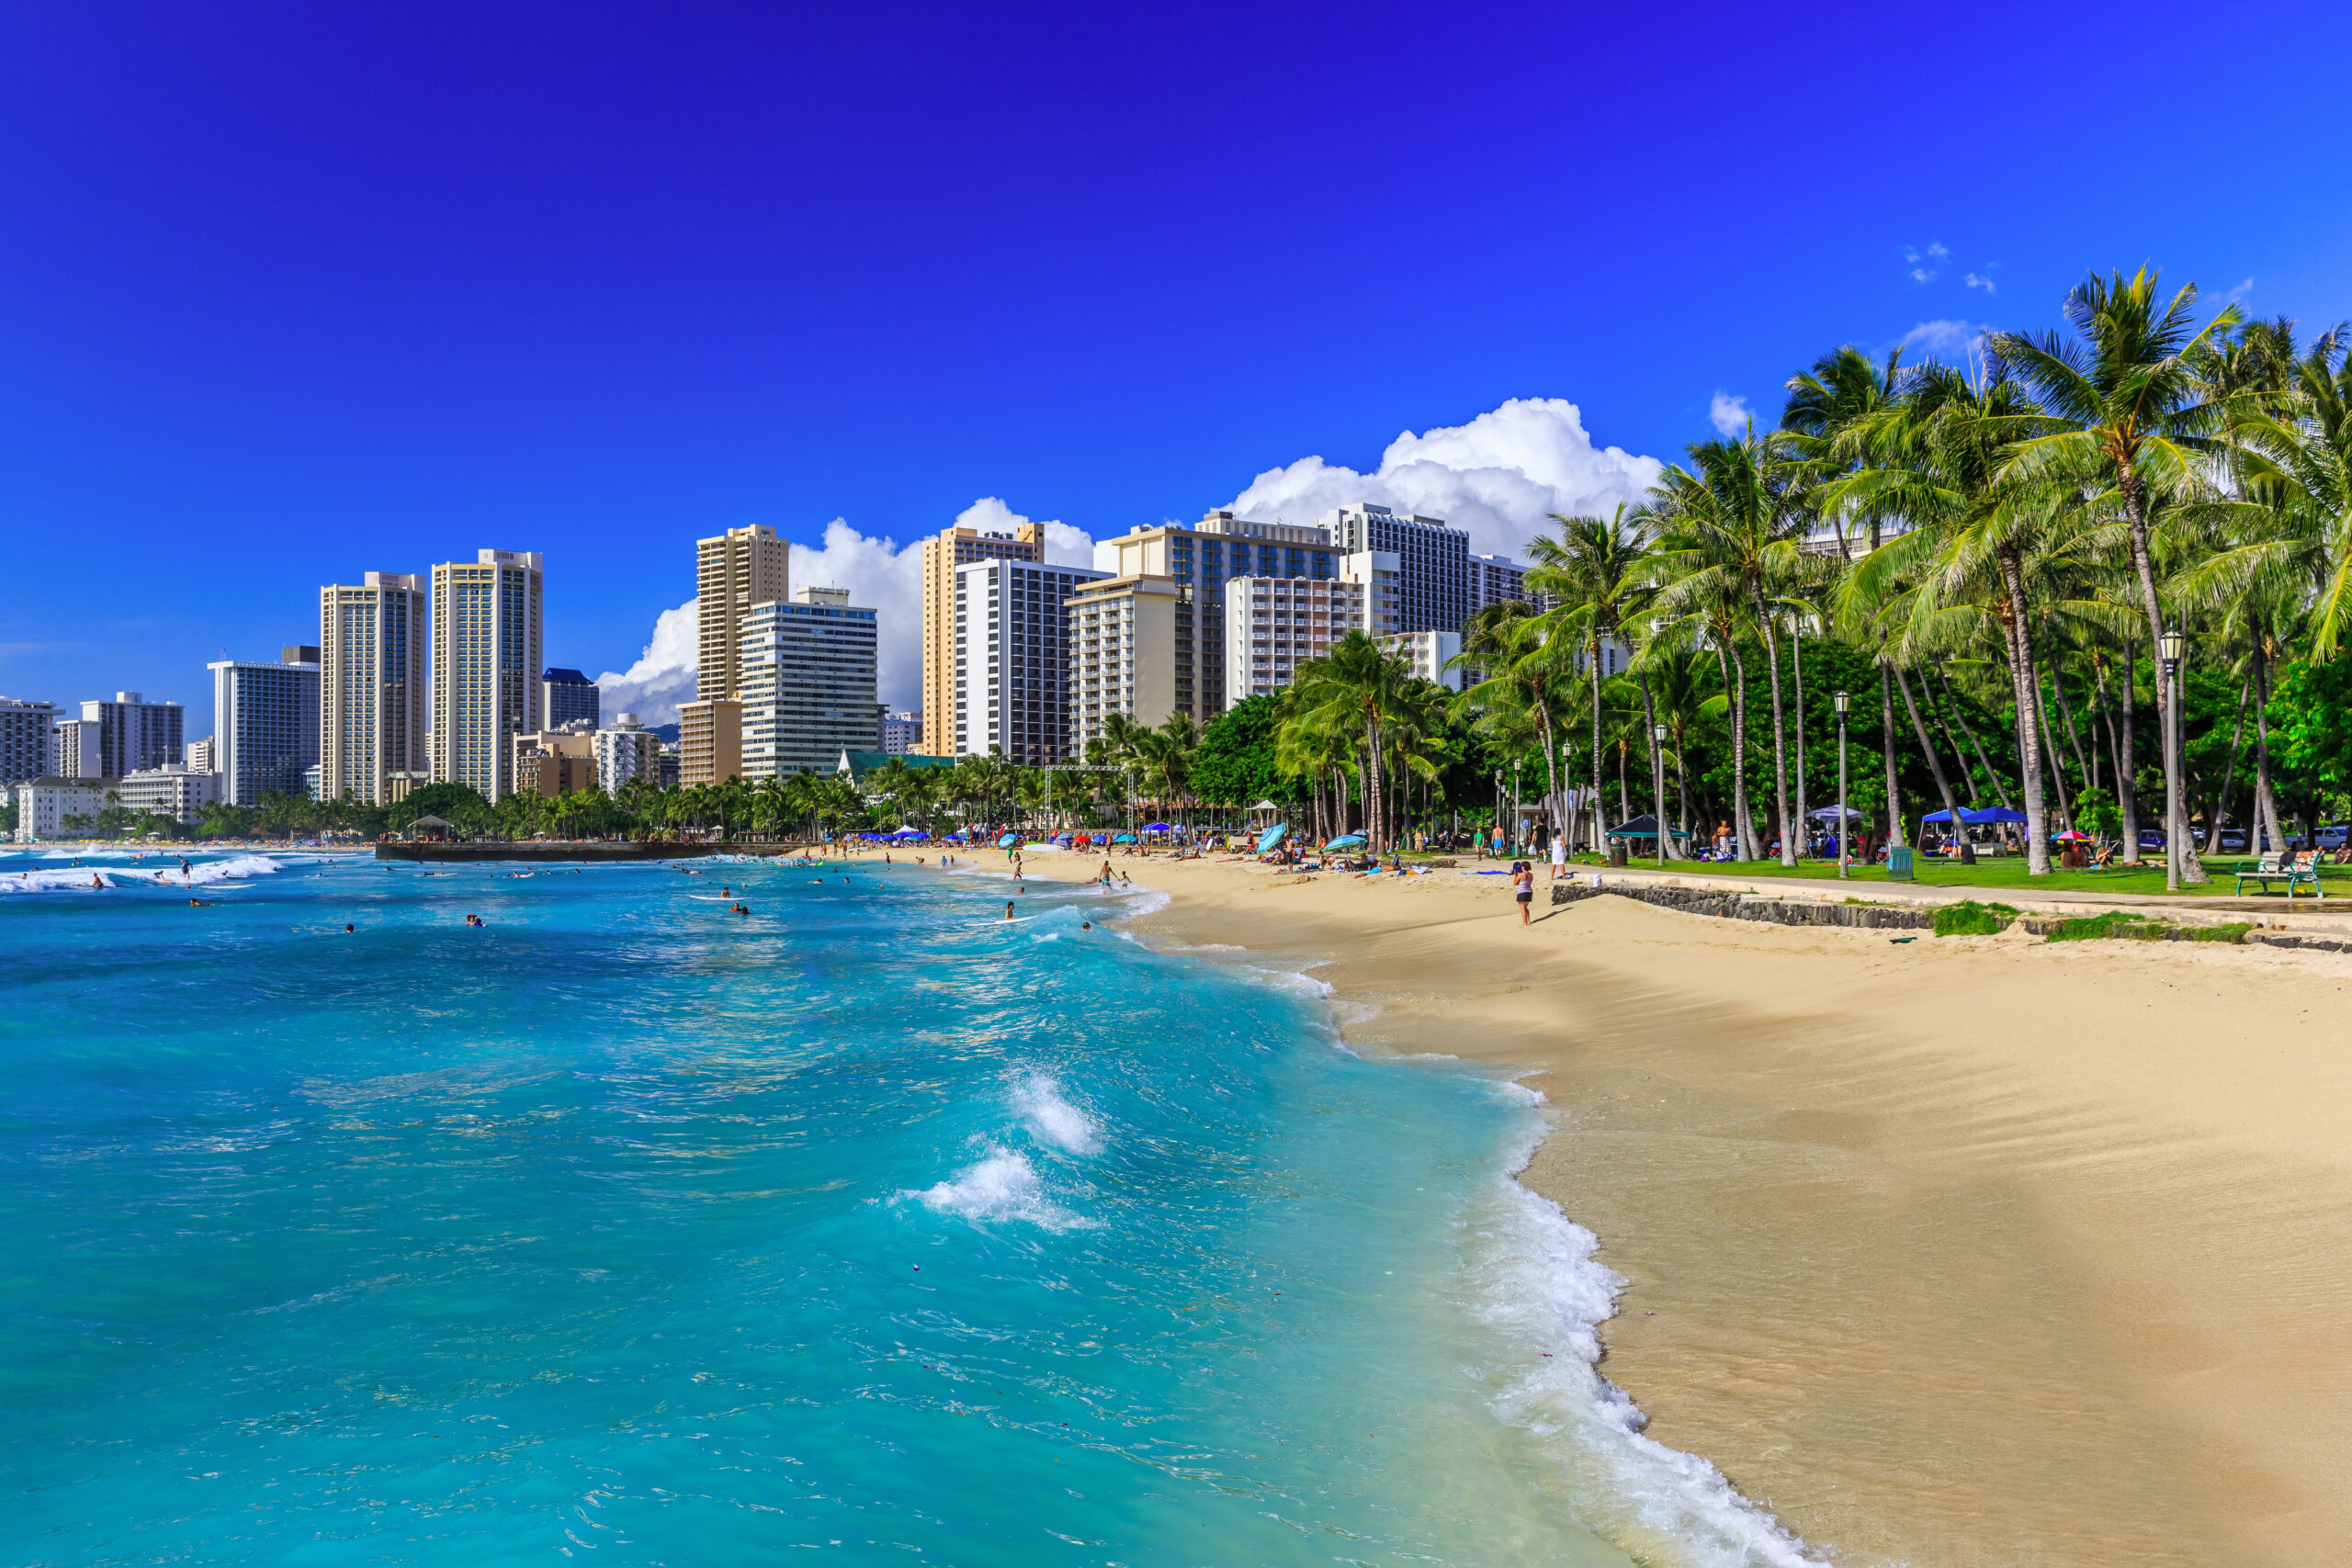 12 Reasons to Never Visit Honolulu in the Future